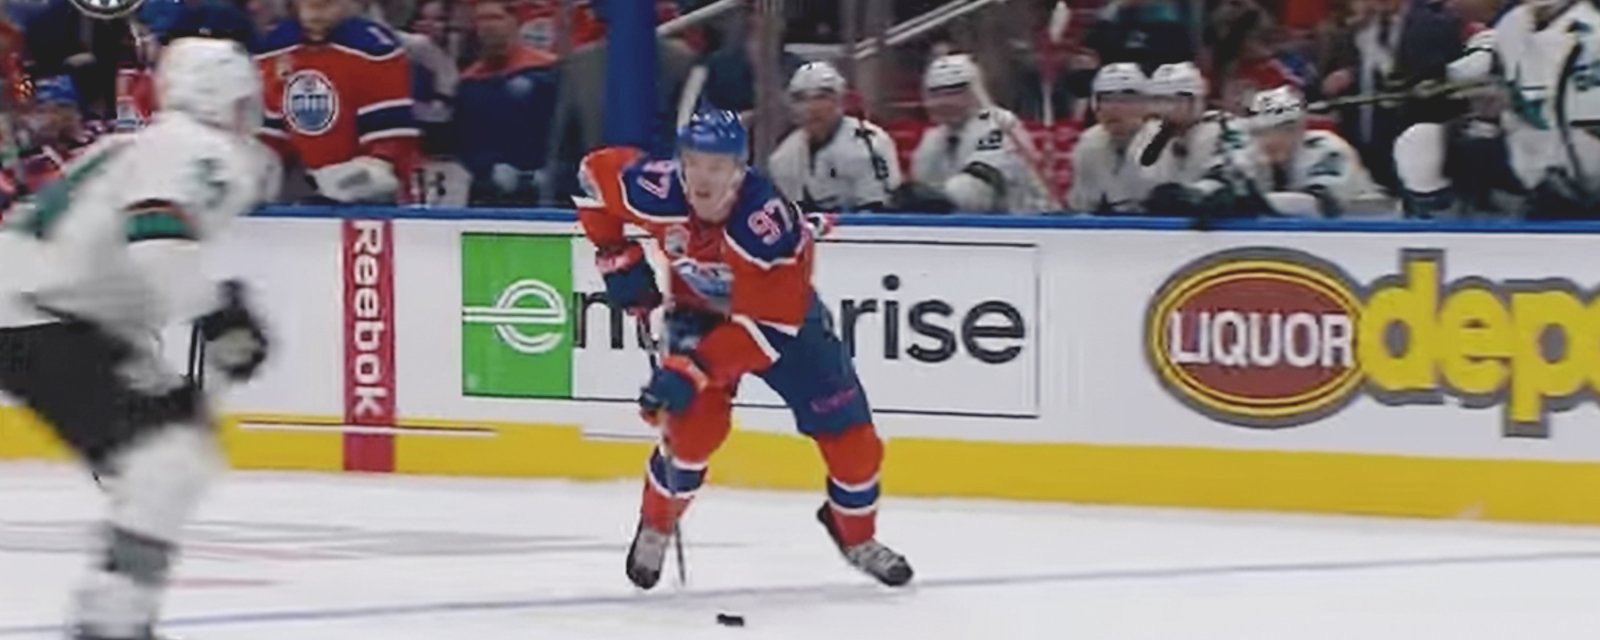 Watch Connor McDavid scores an absolutely insane goal late in the 3rd.